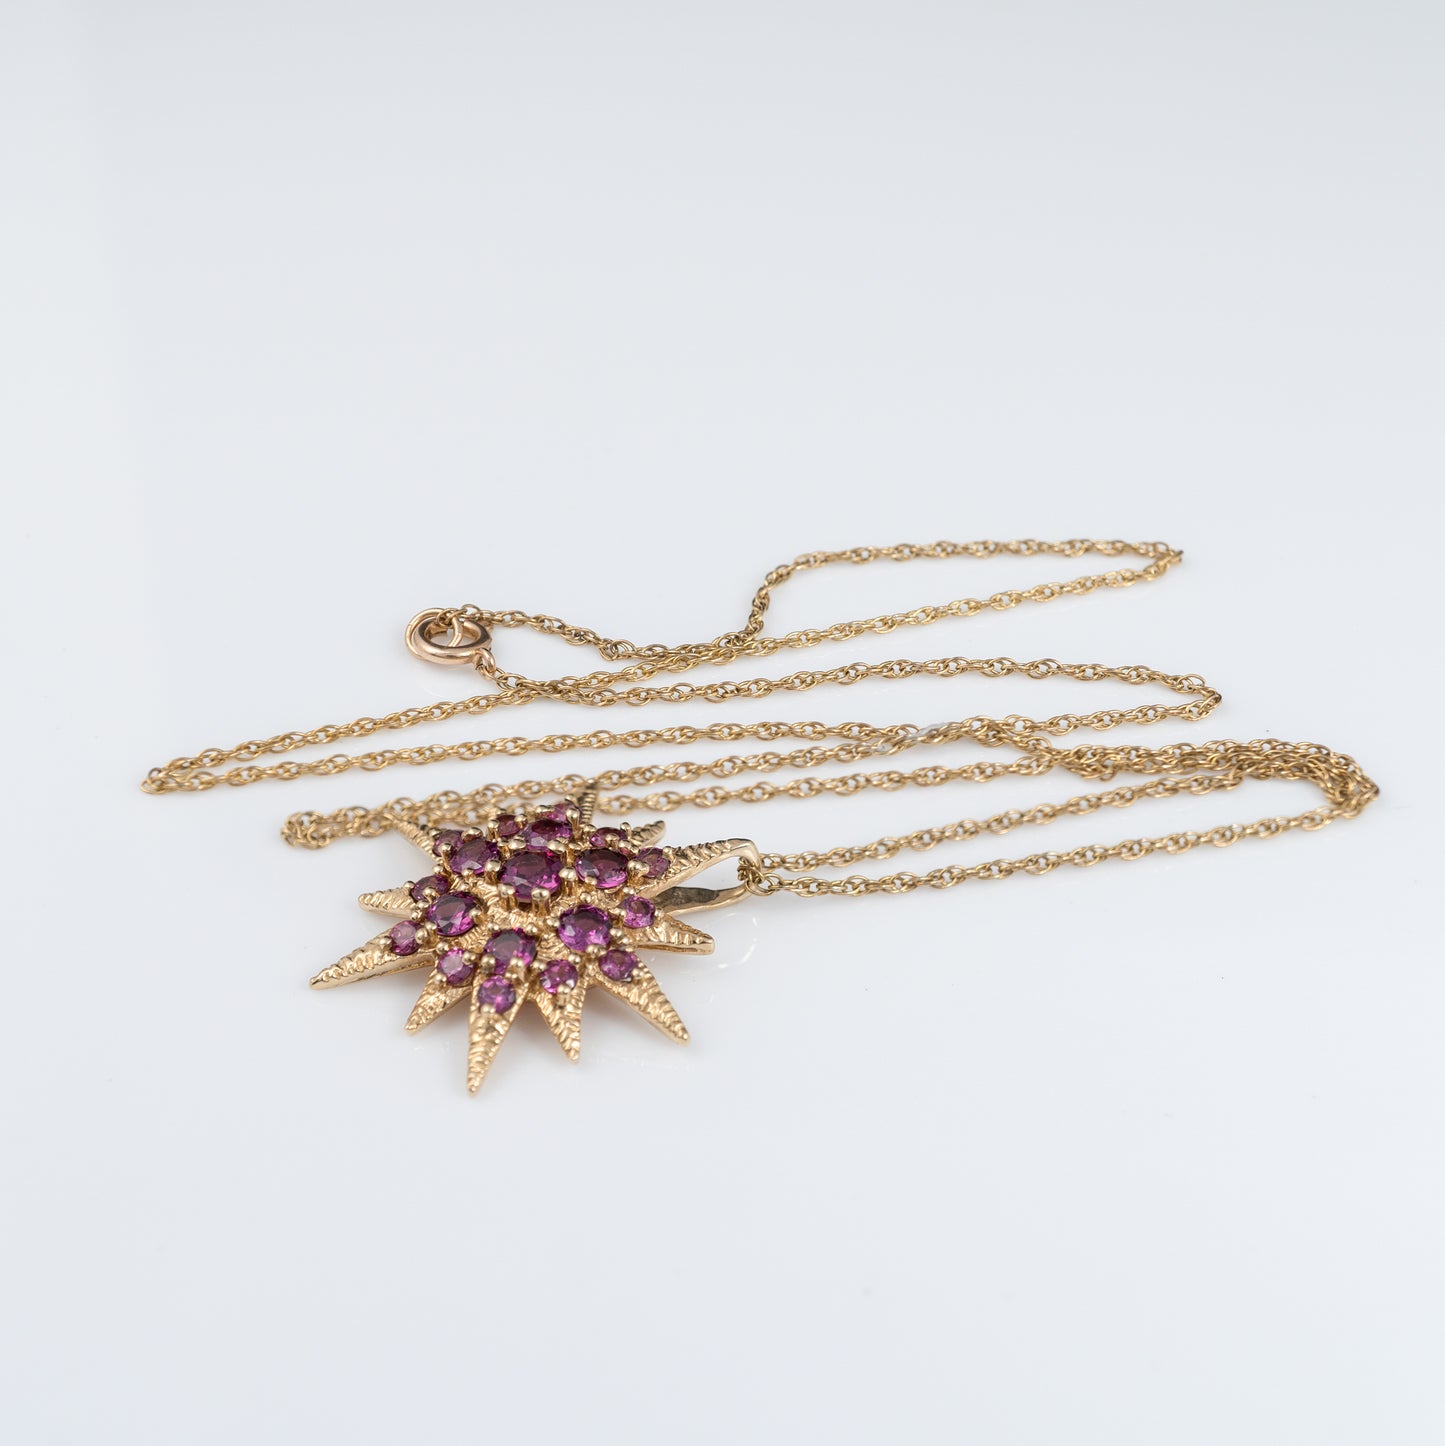 "9ct Gold Necklace with Star Pink Gemstones